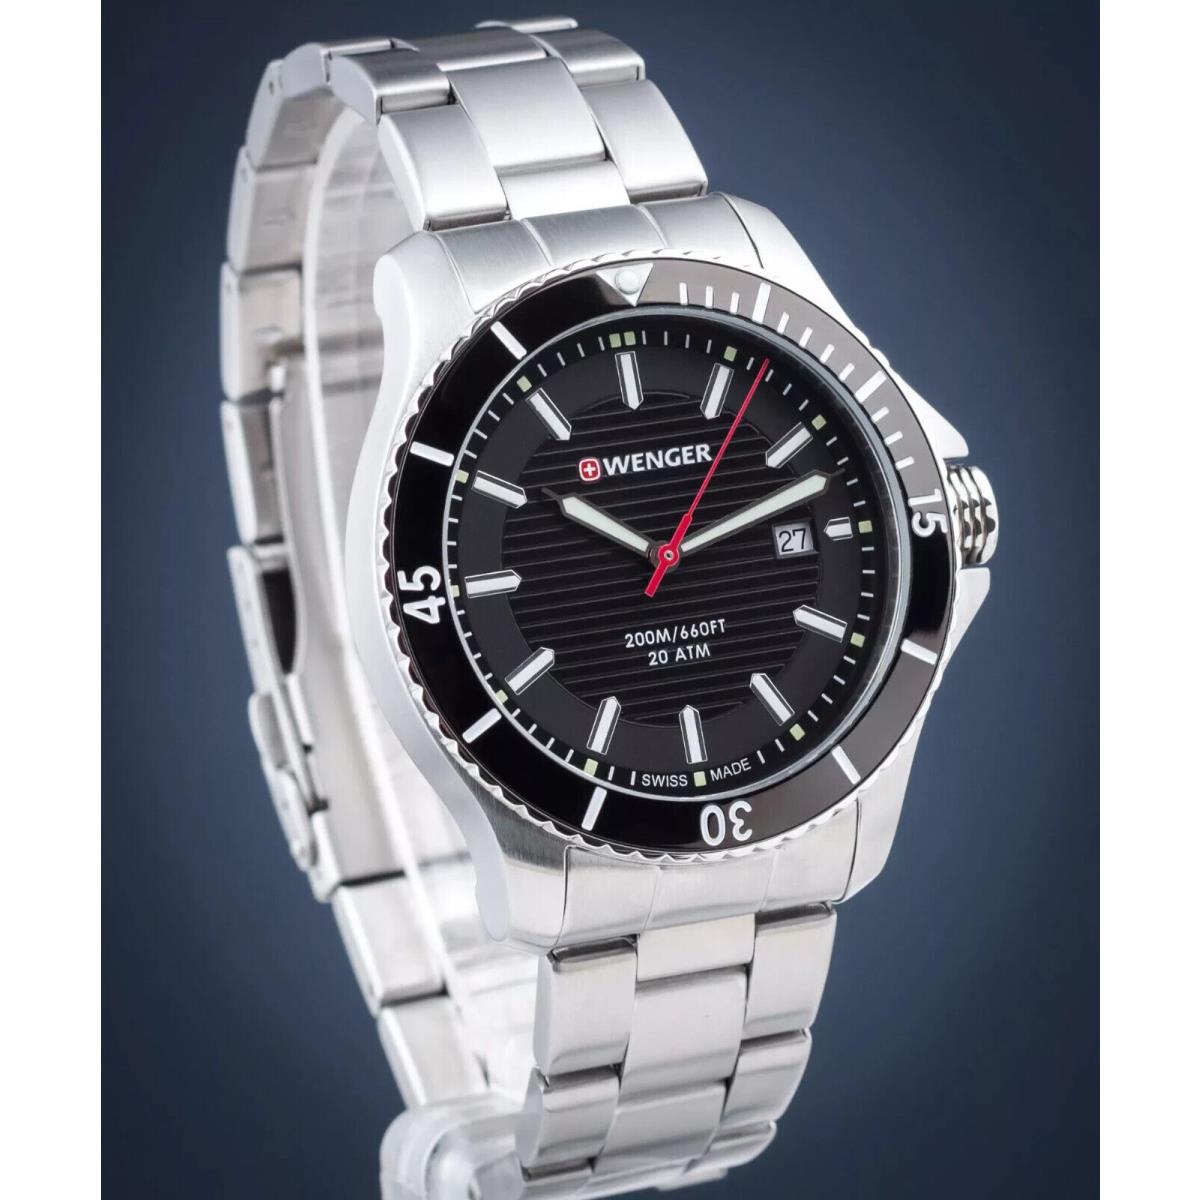 Wenger Seaforce Black Dial Stainless 0641 18 200 m 20 Atm